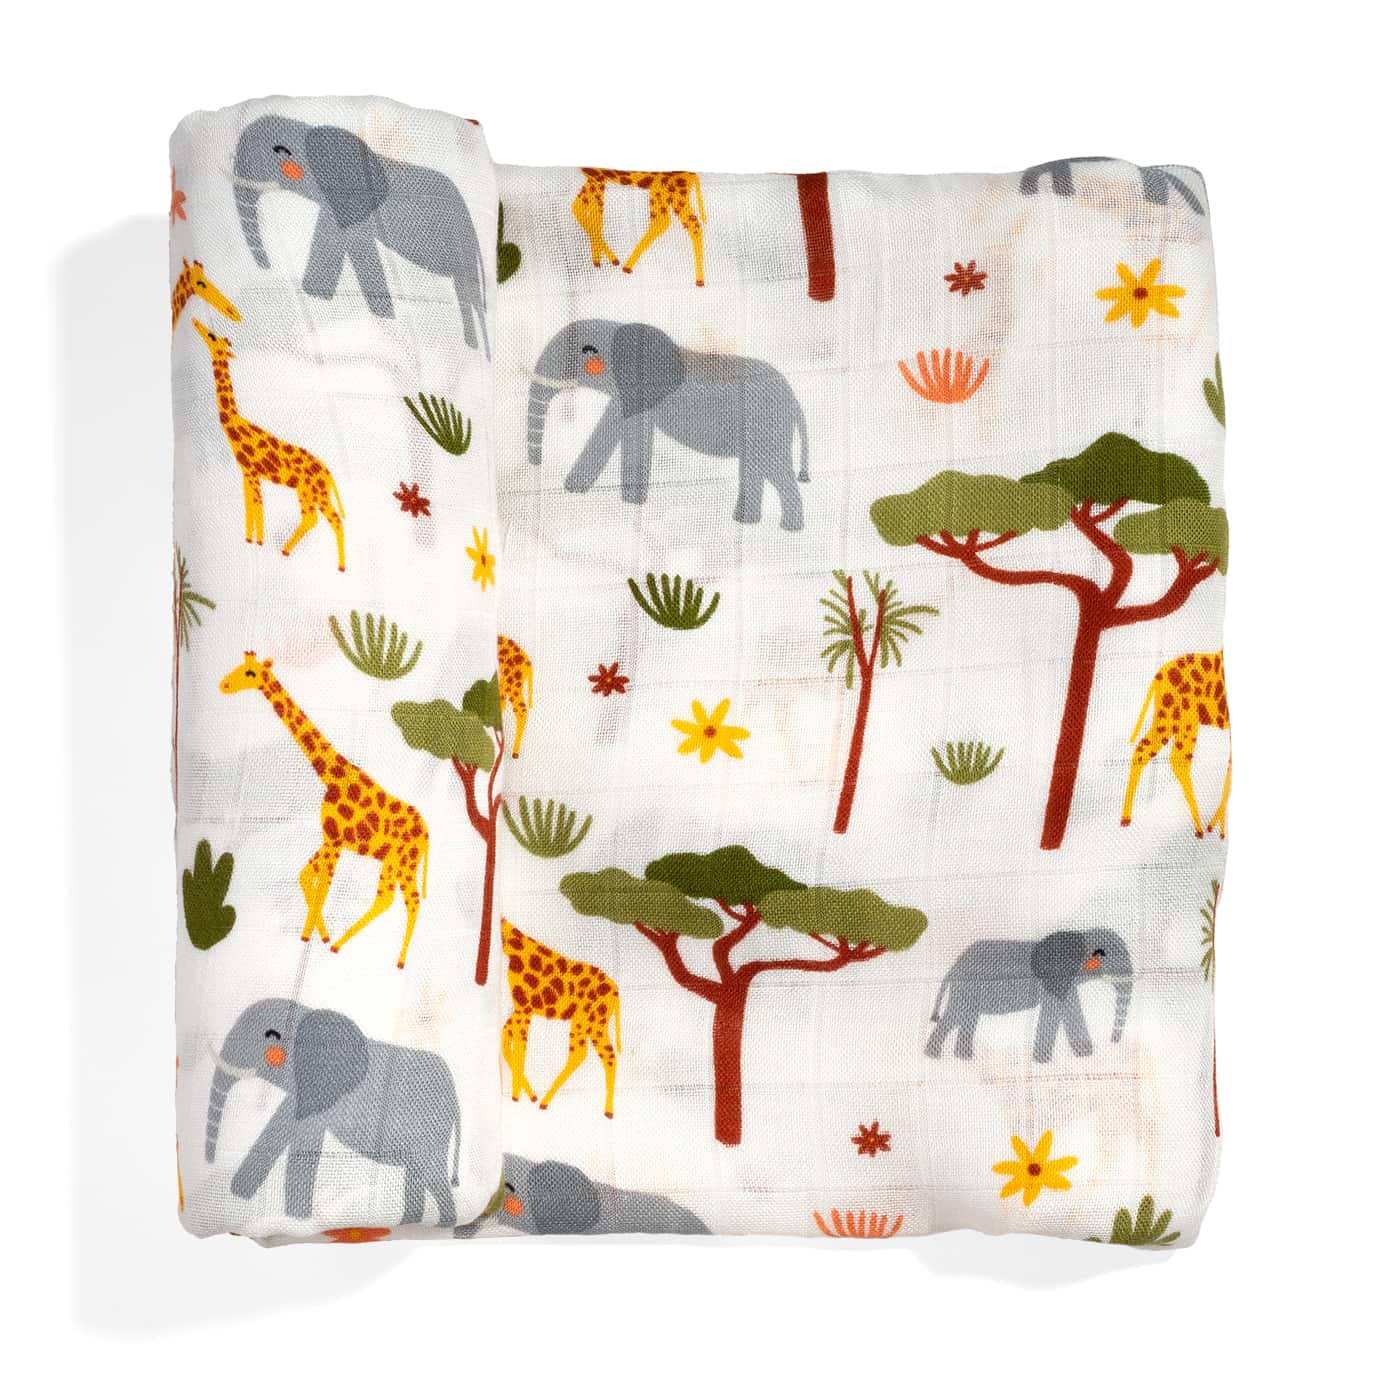 Bamboo Swaddle - In the Savanna